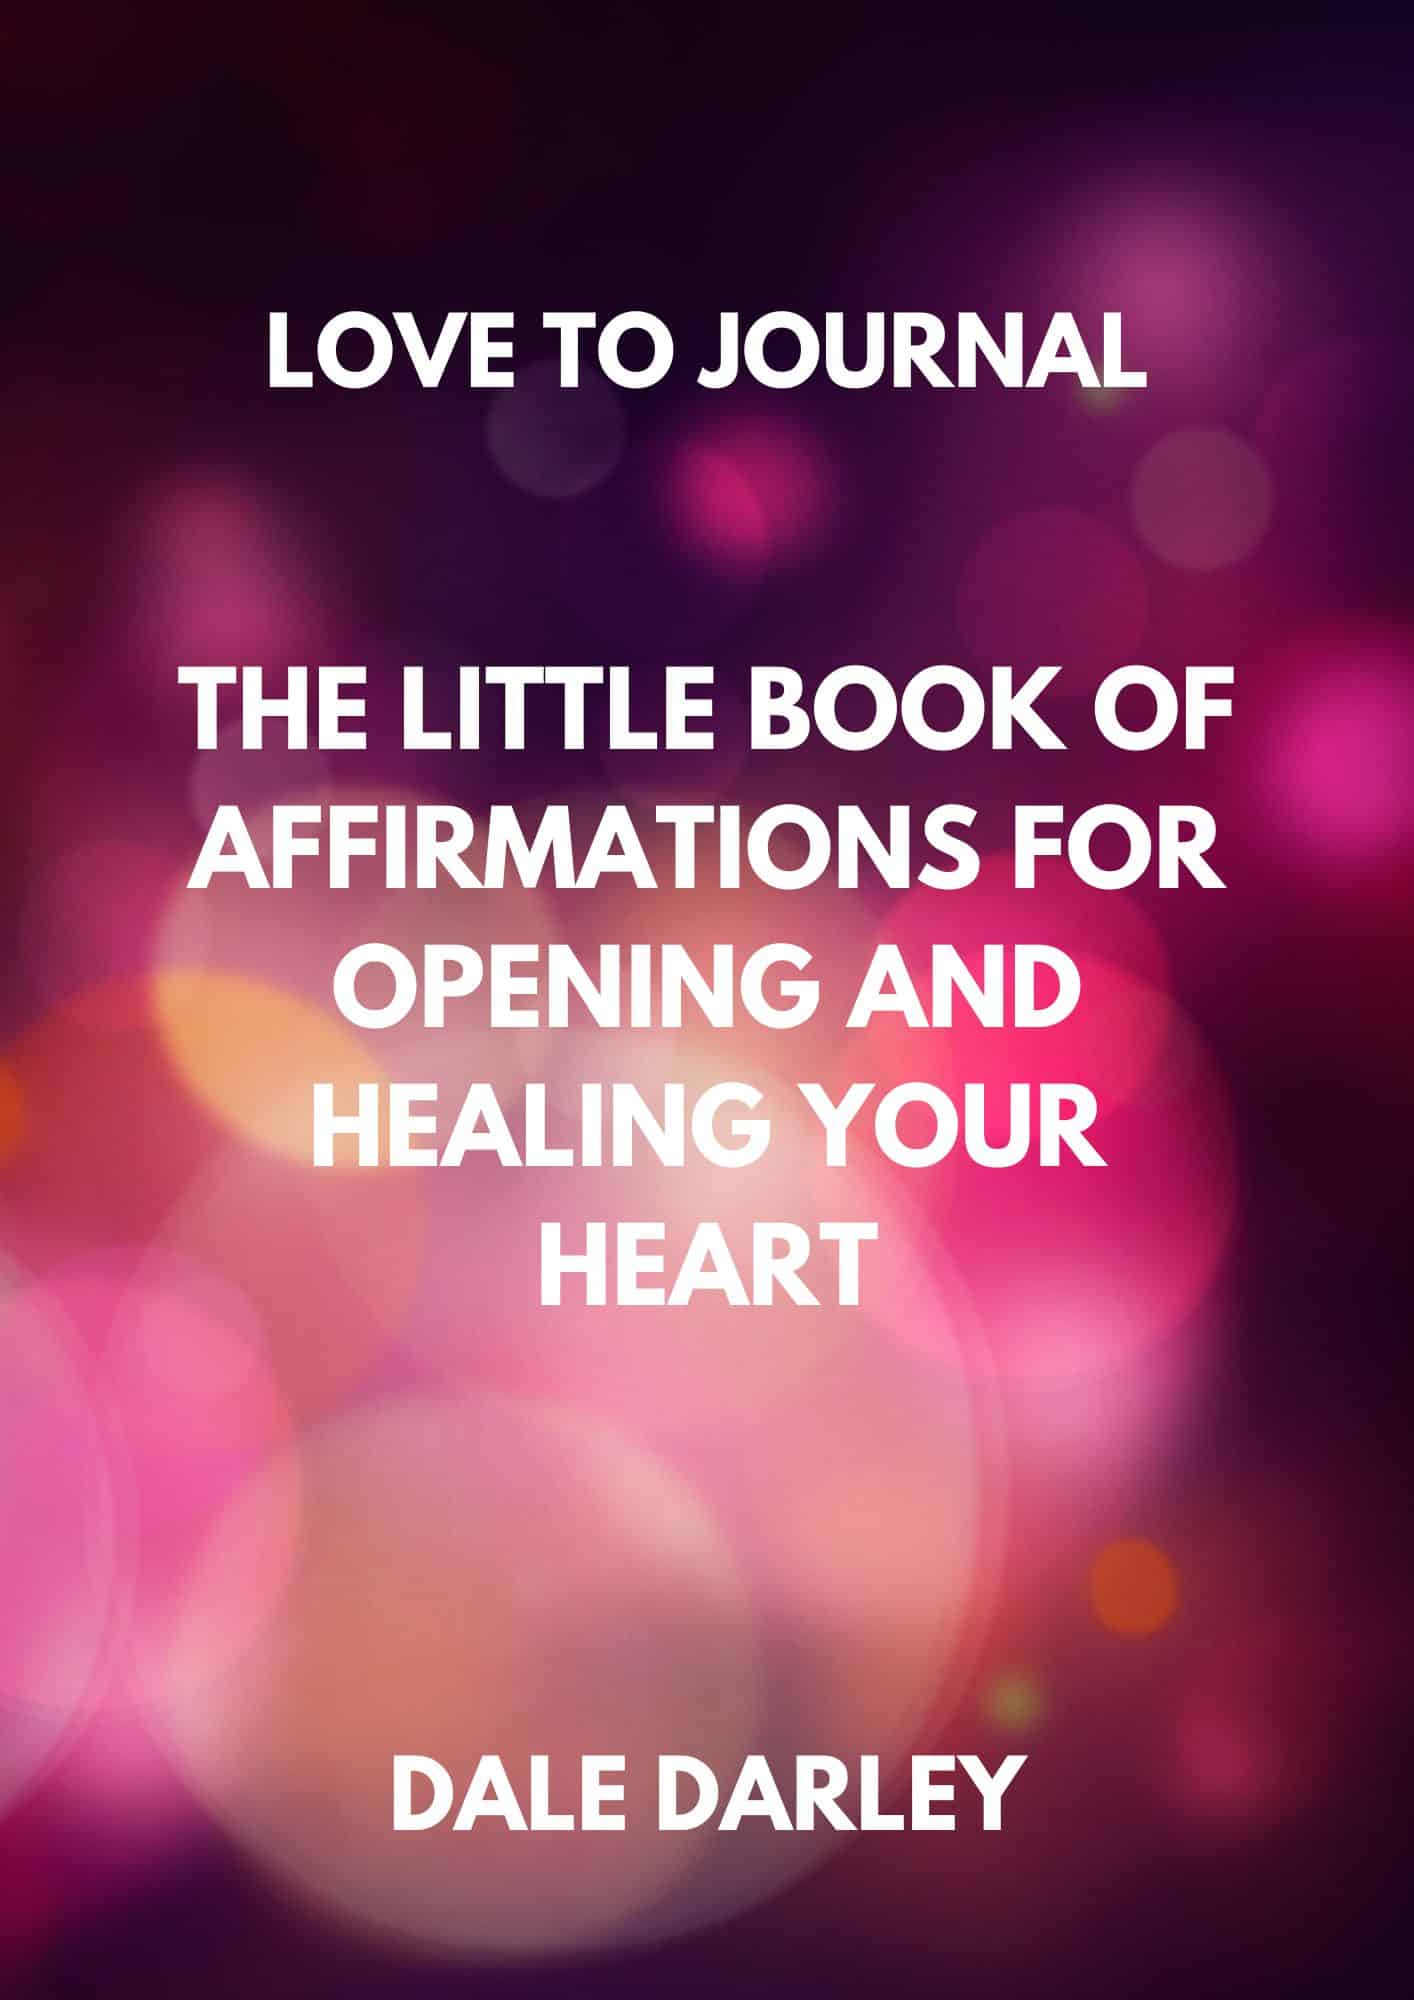 The Little Book Of Affirmations For Opening and healing Your Heart